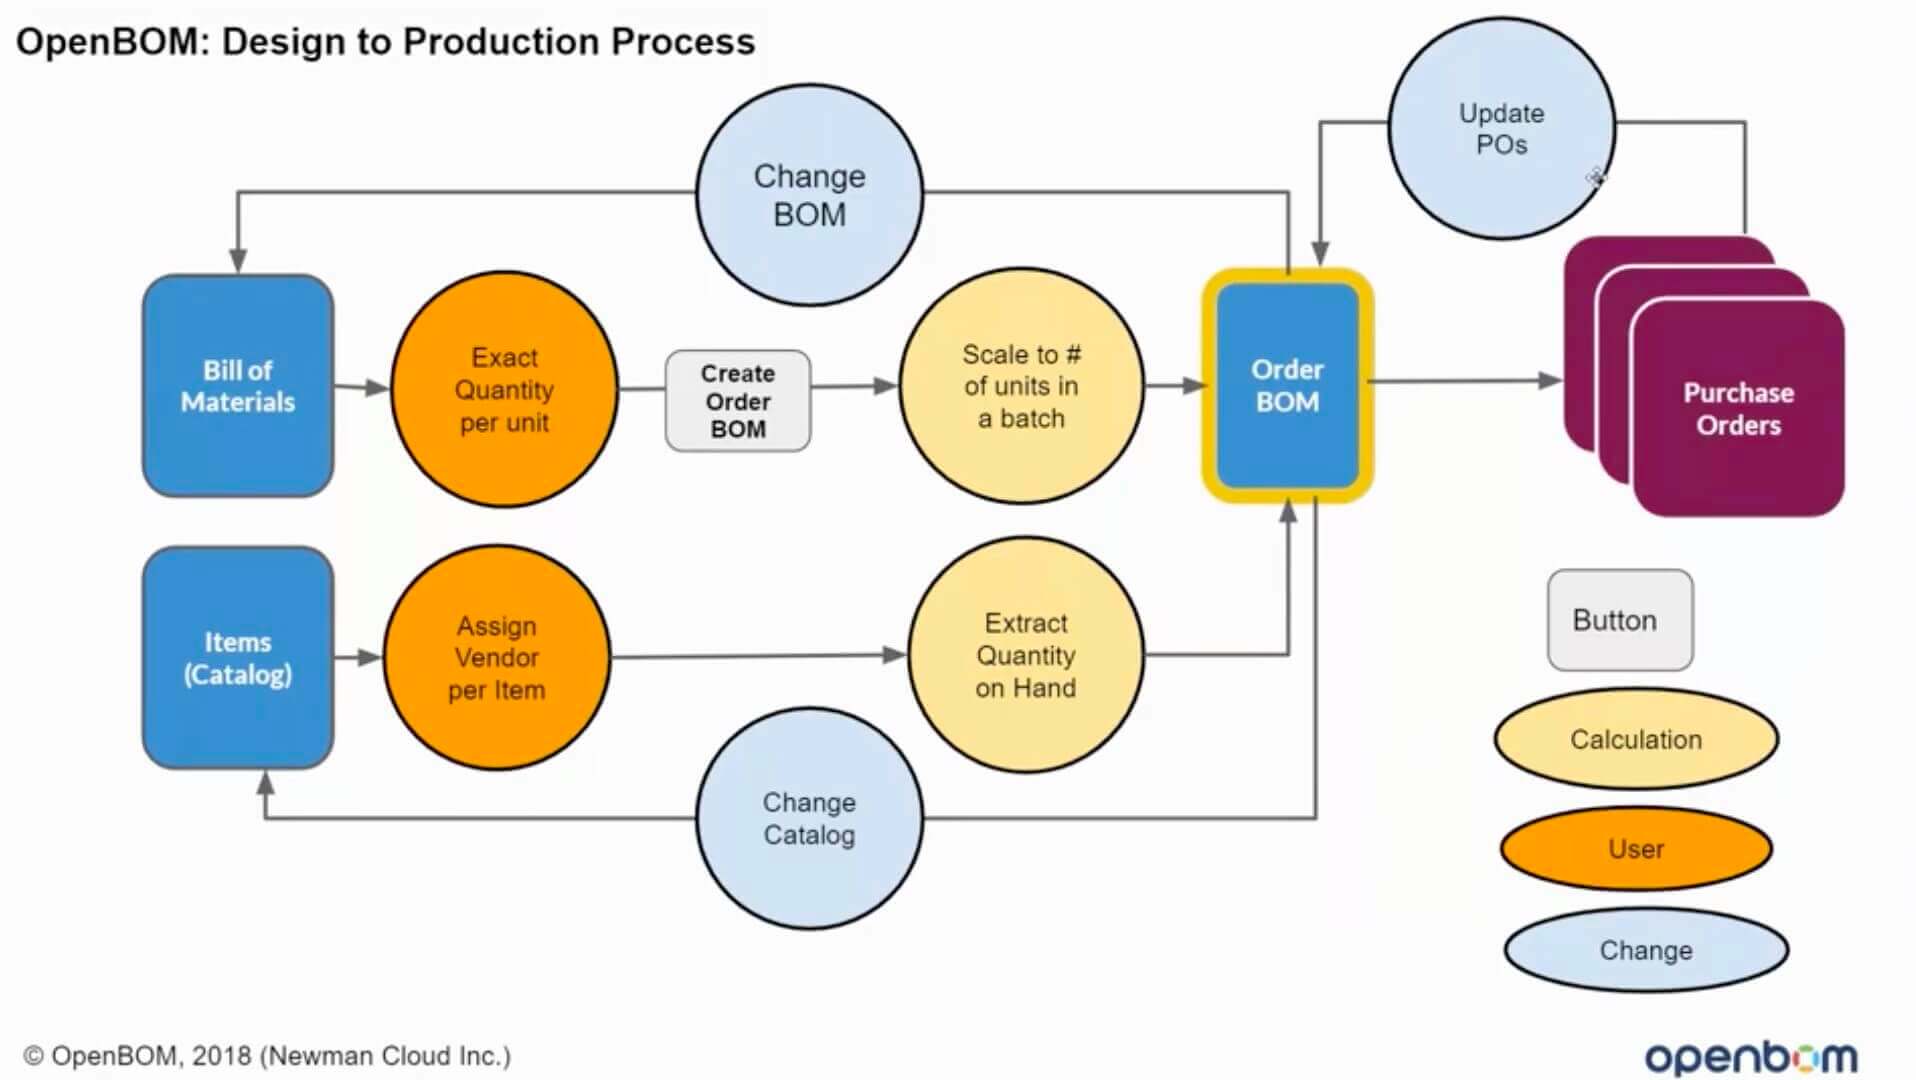 OpenBOM Design to Production Process [Advanced]